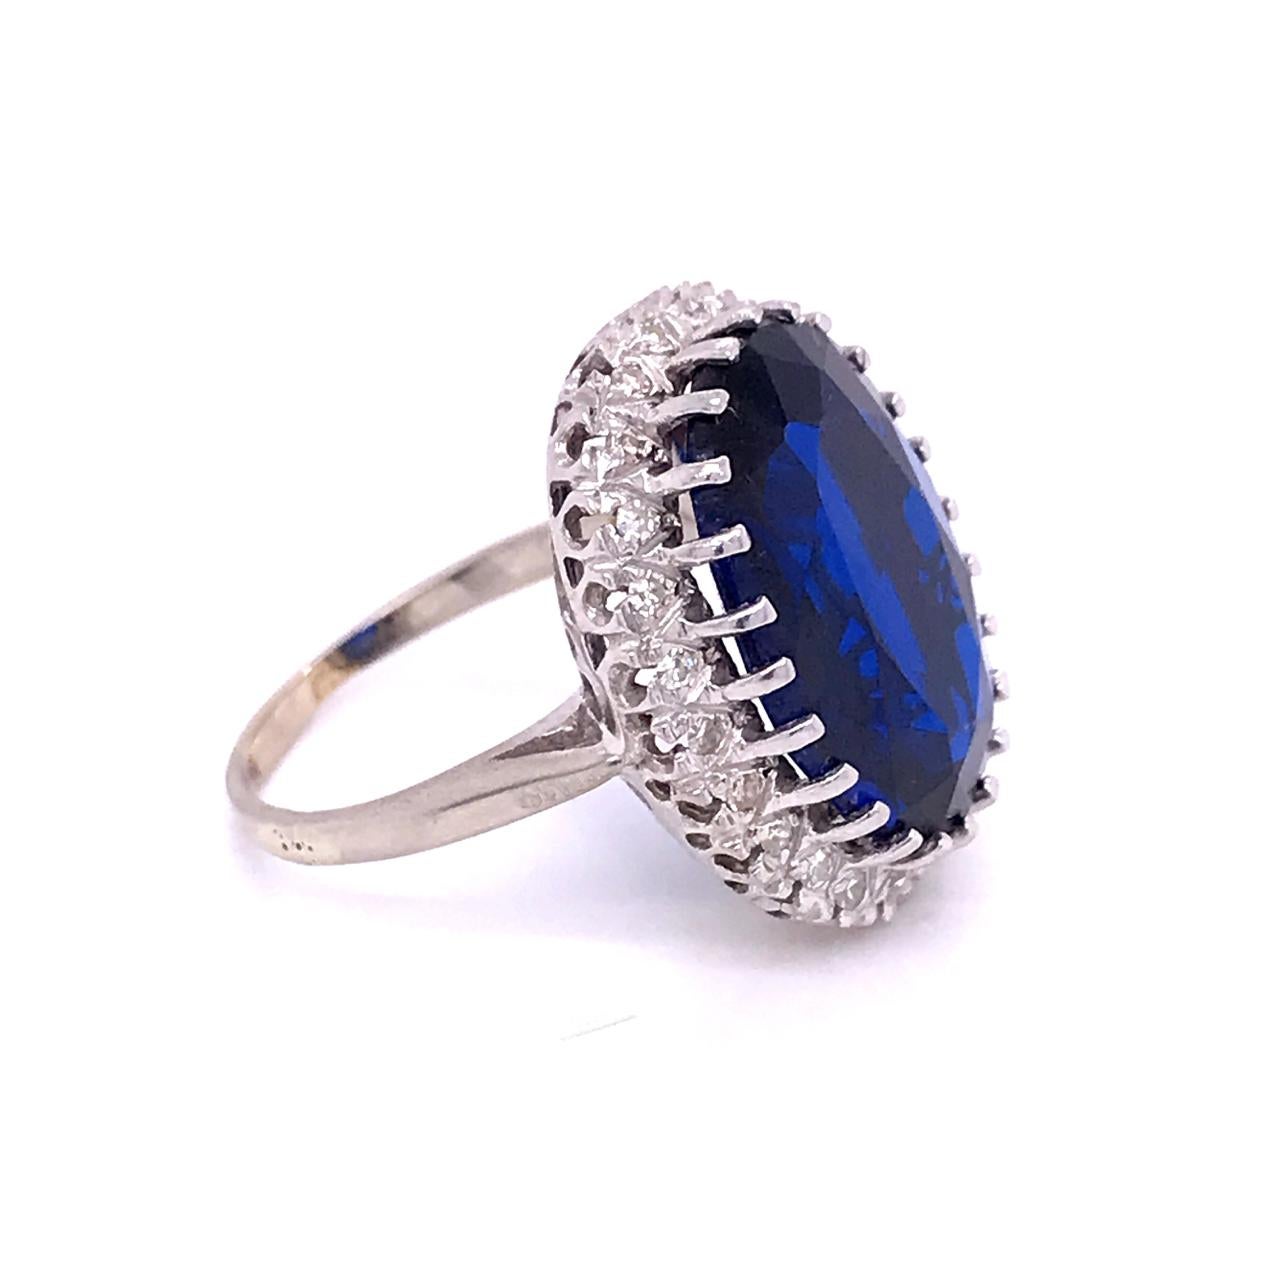 14 Karat White Gold, Diamond, and Large Blue Topaz Cocktail Ring For Sale 4